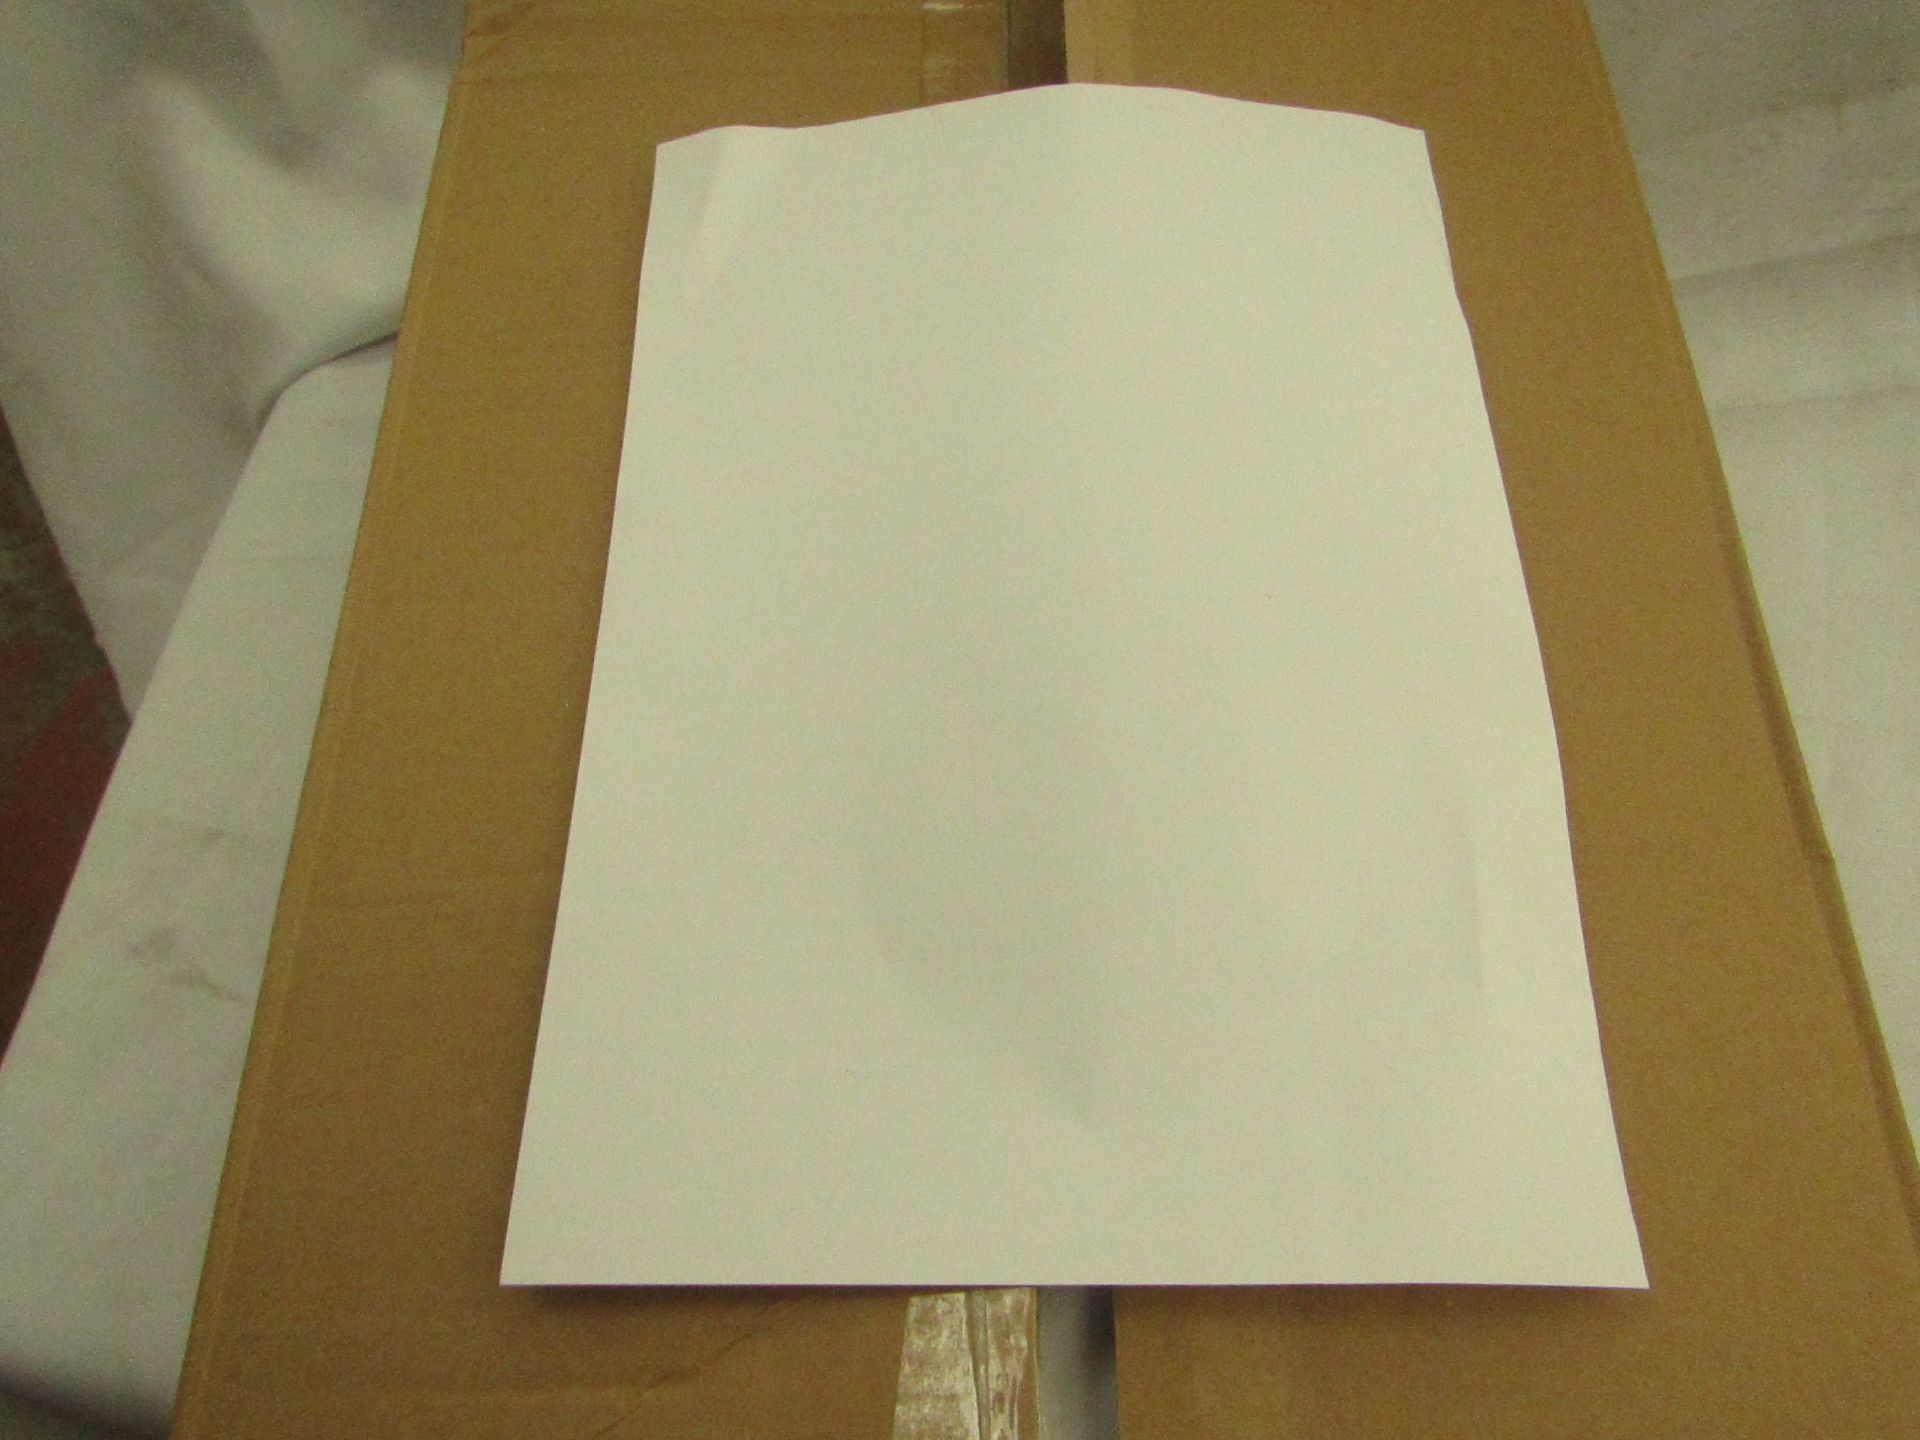 1x Box of Approximately 2000 Sheets of White Paper - Unused & Boxed